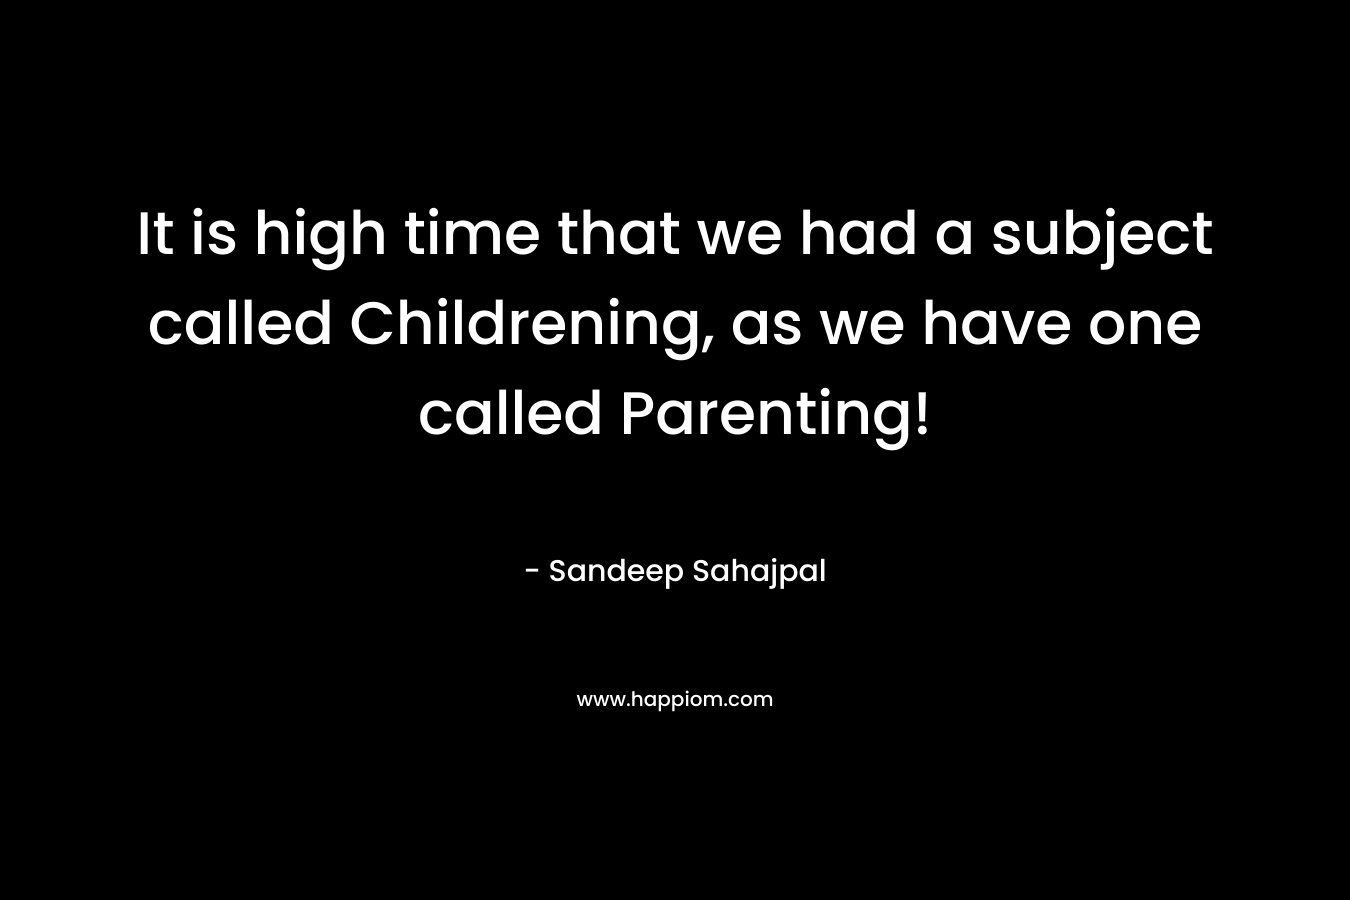 It is high time that we had a subject called Childrening, as we have one called Parenting! – Sandeep Sahajpal